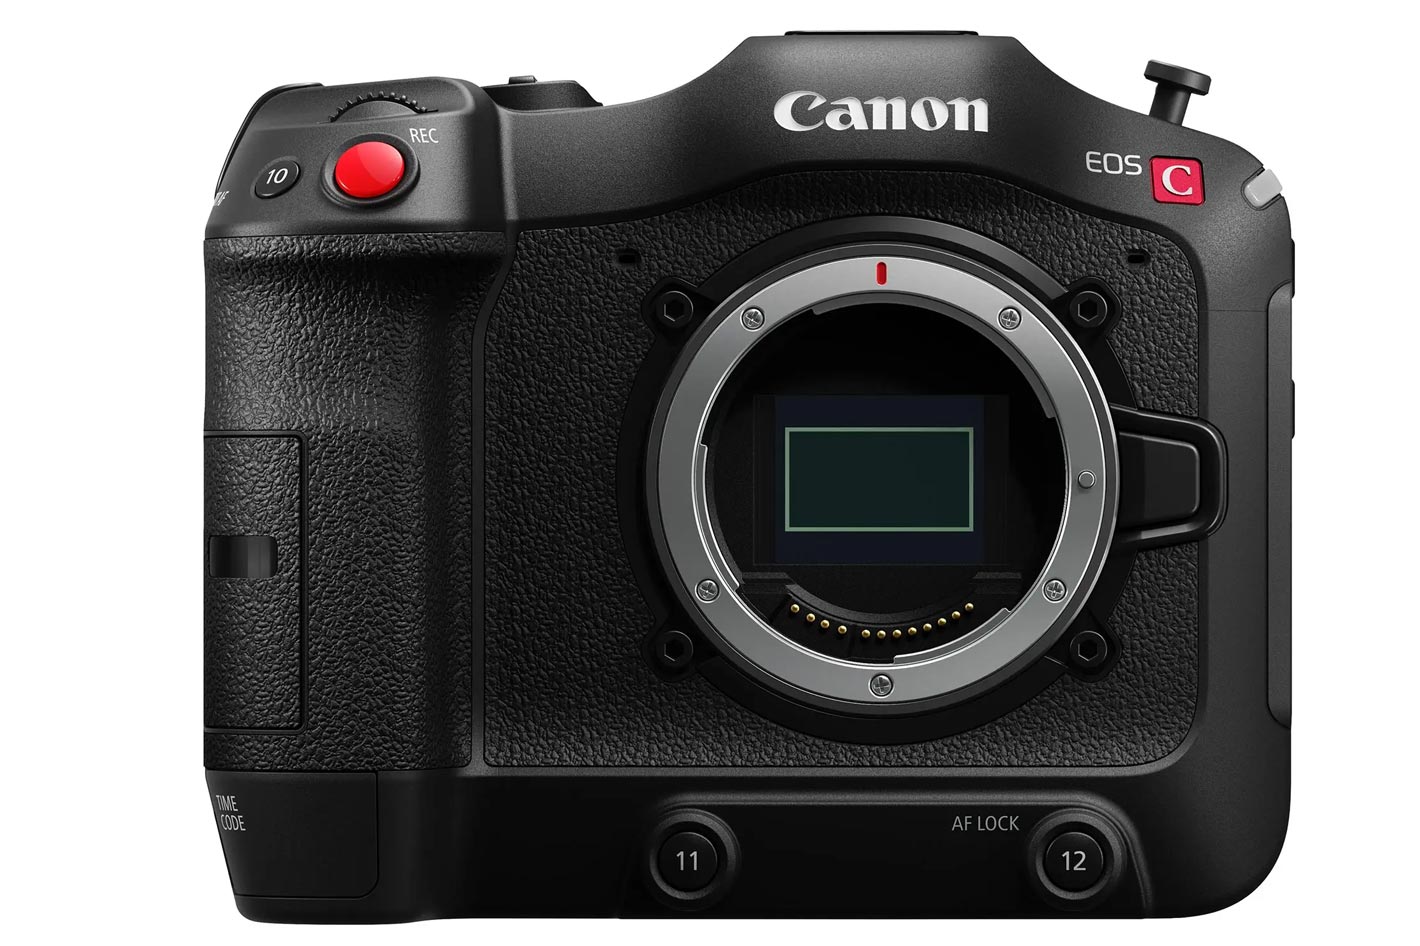 Adobe and Canon’s Black Friday deals and gift guides